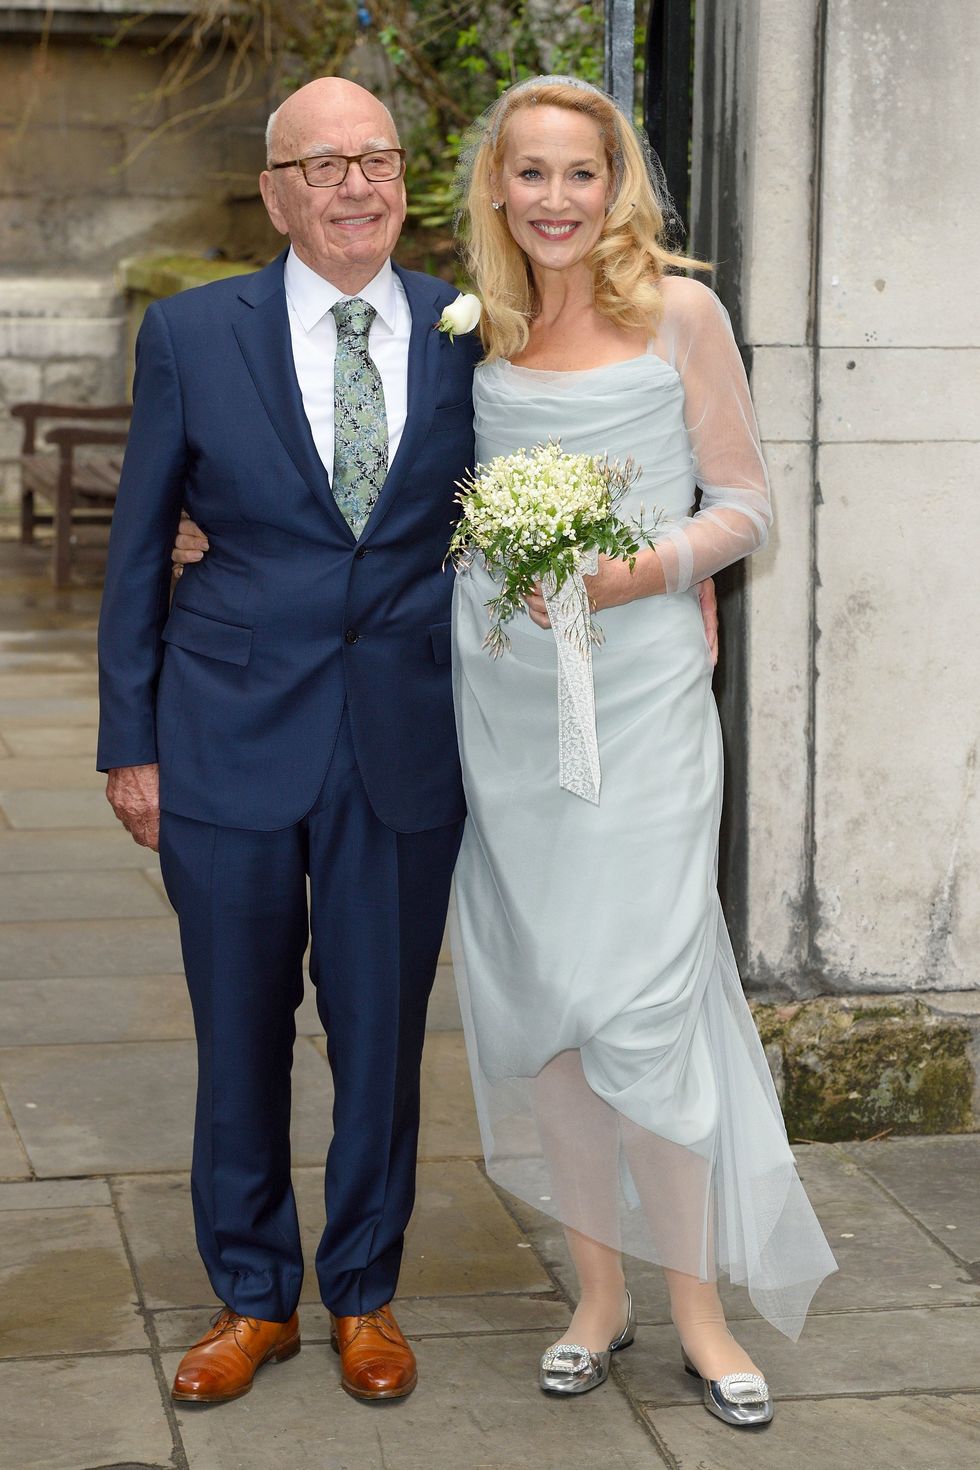 Jerry Hall and Rupert Murdoch wedding pictures